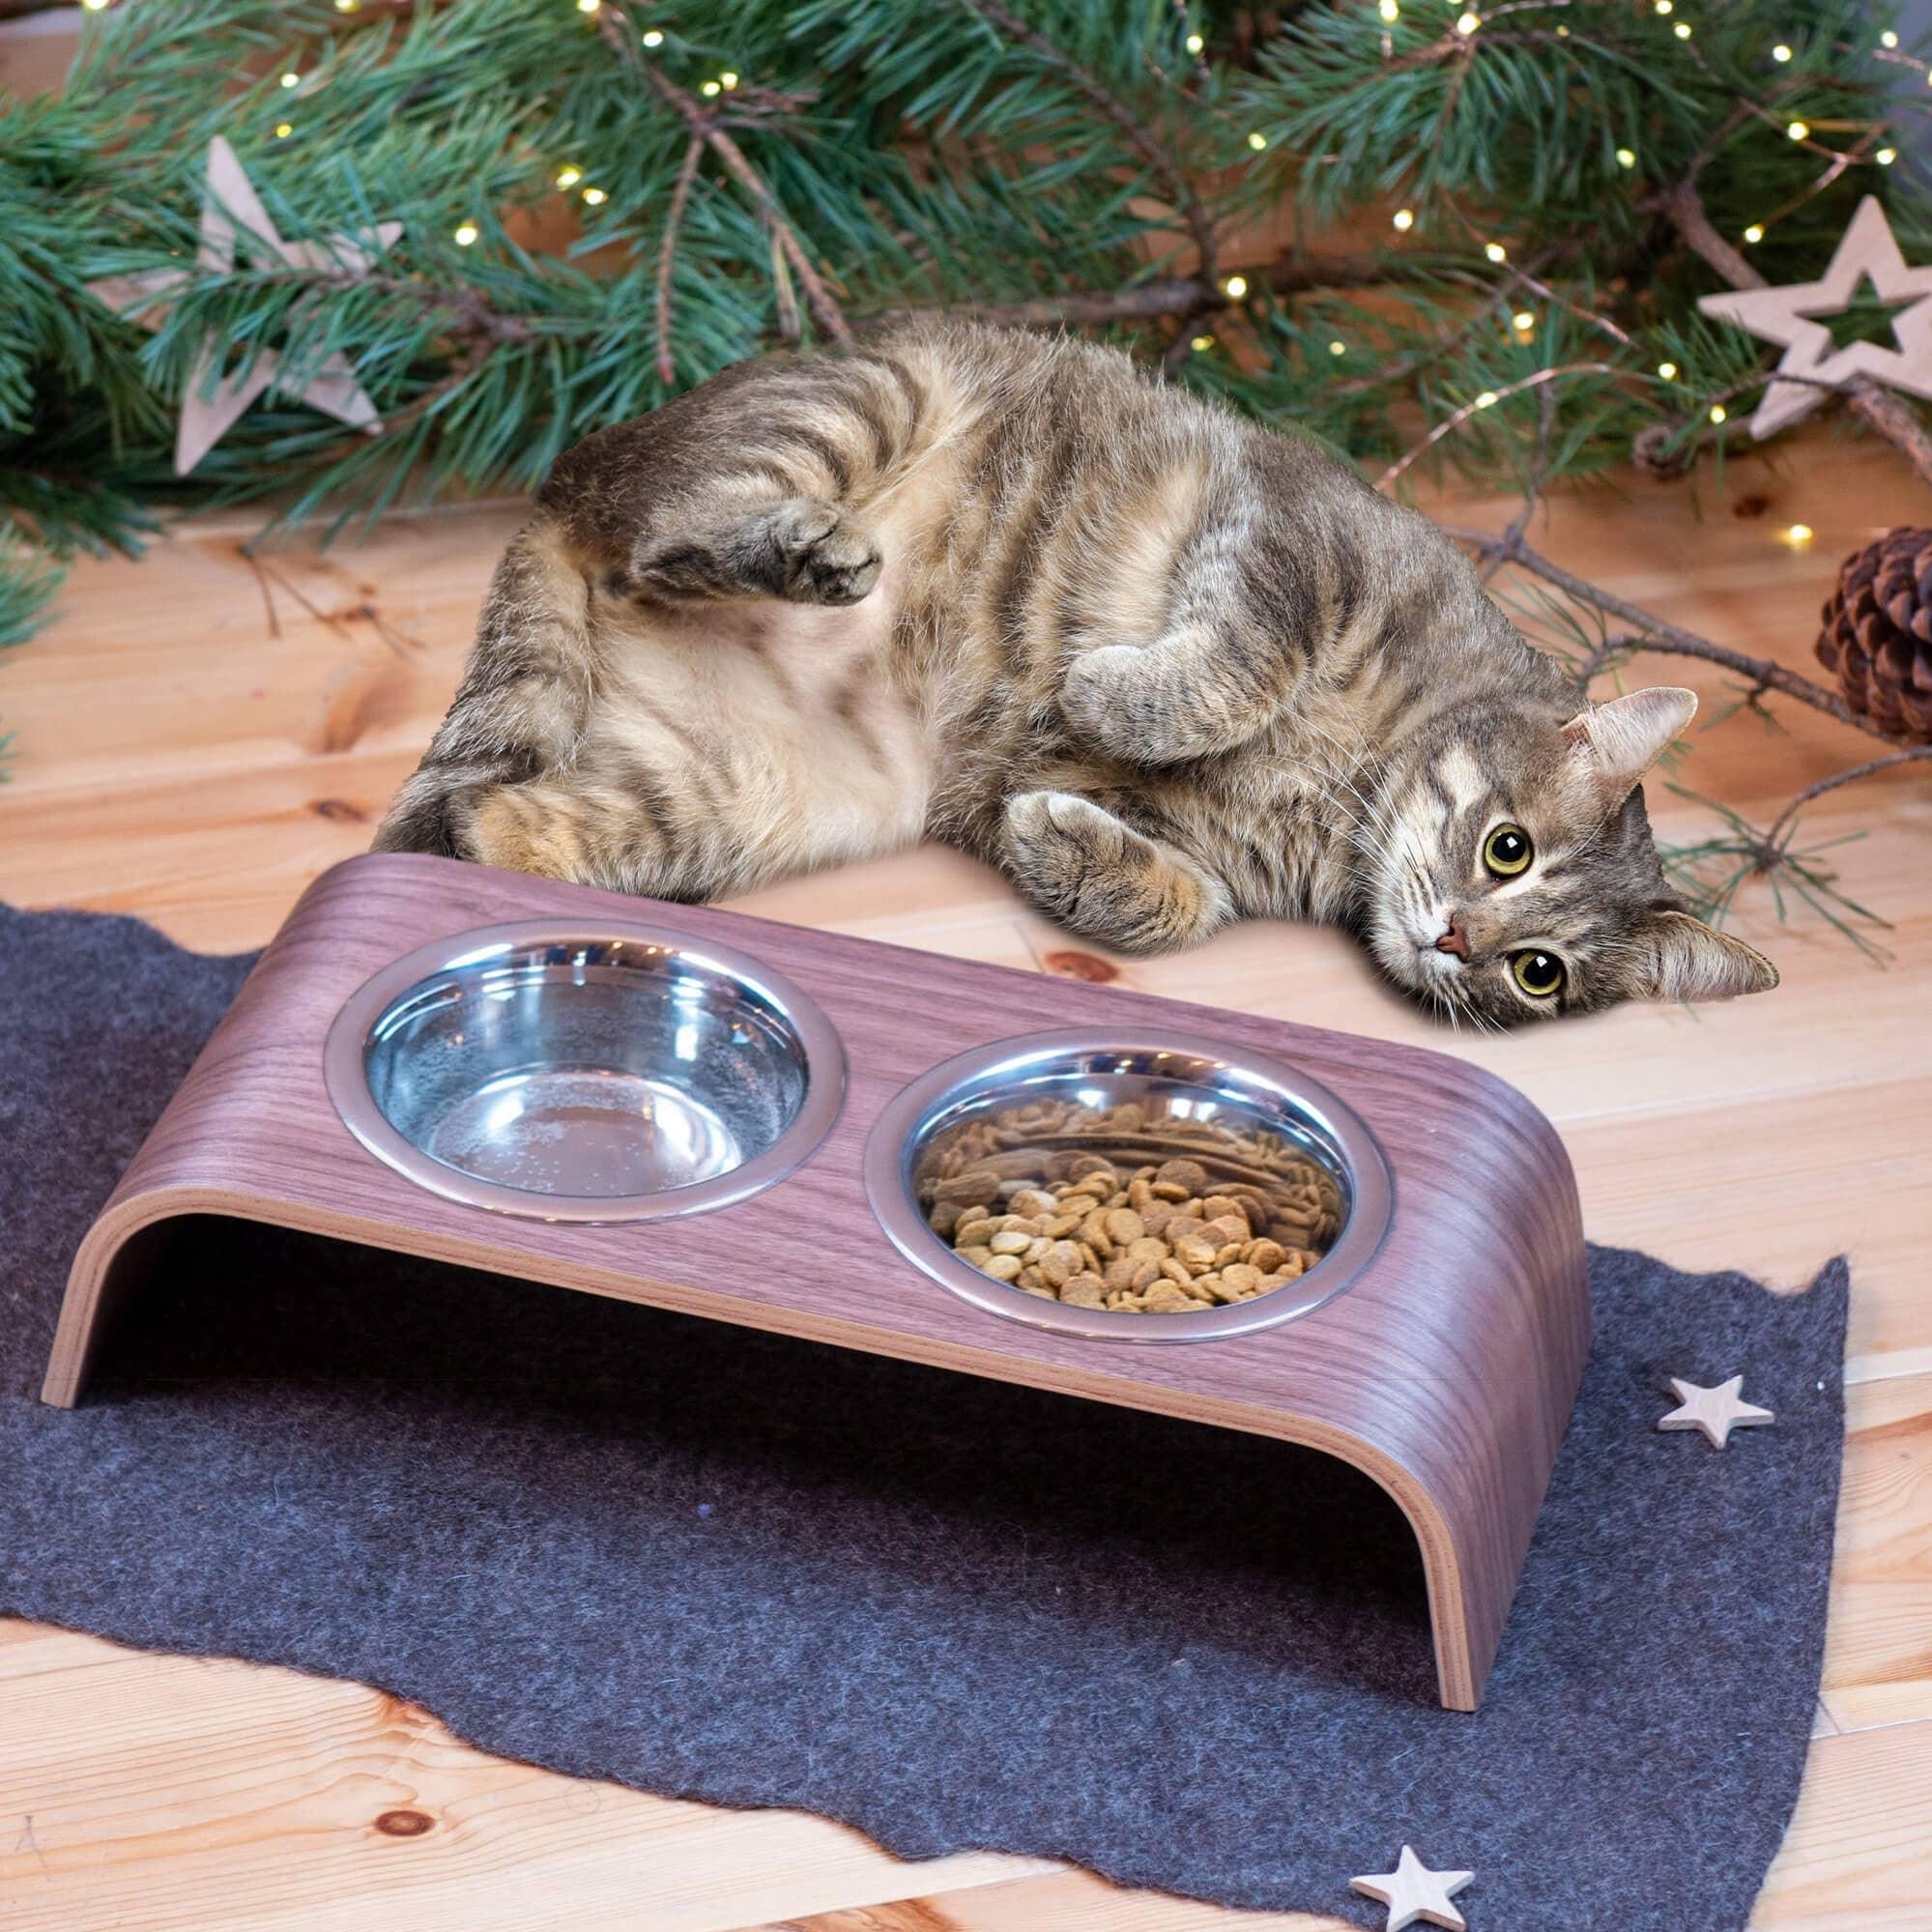 Wooden Elevated Stand for cats and dogs: Walnut / 56x20x20 cm - Rocky & Maggie's Pet Boutique and Salon